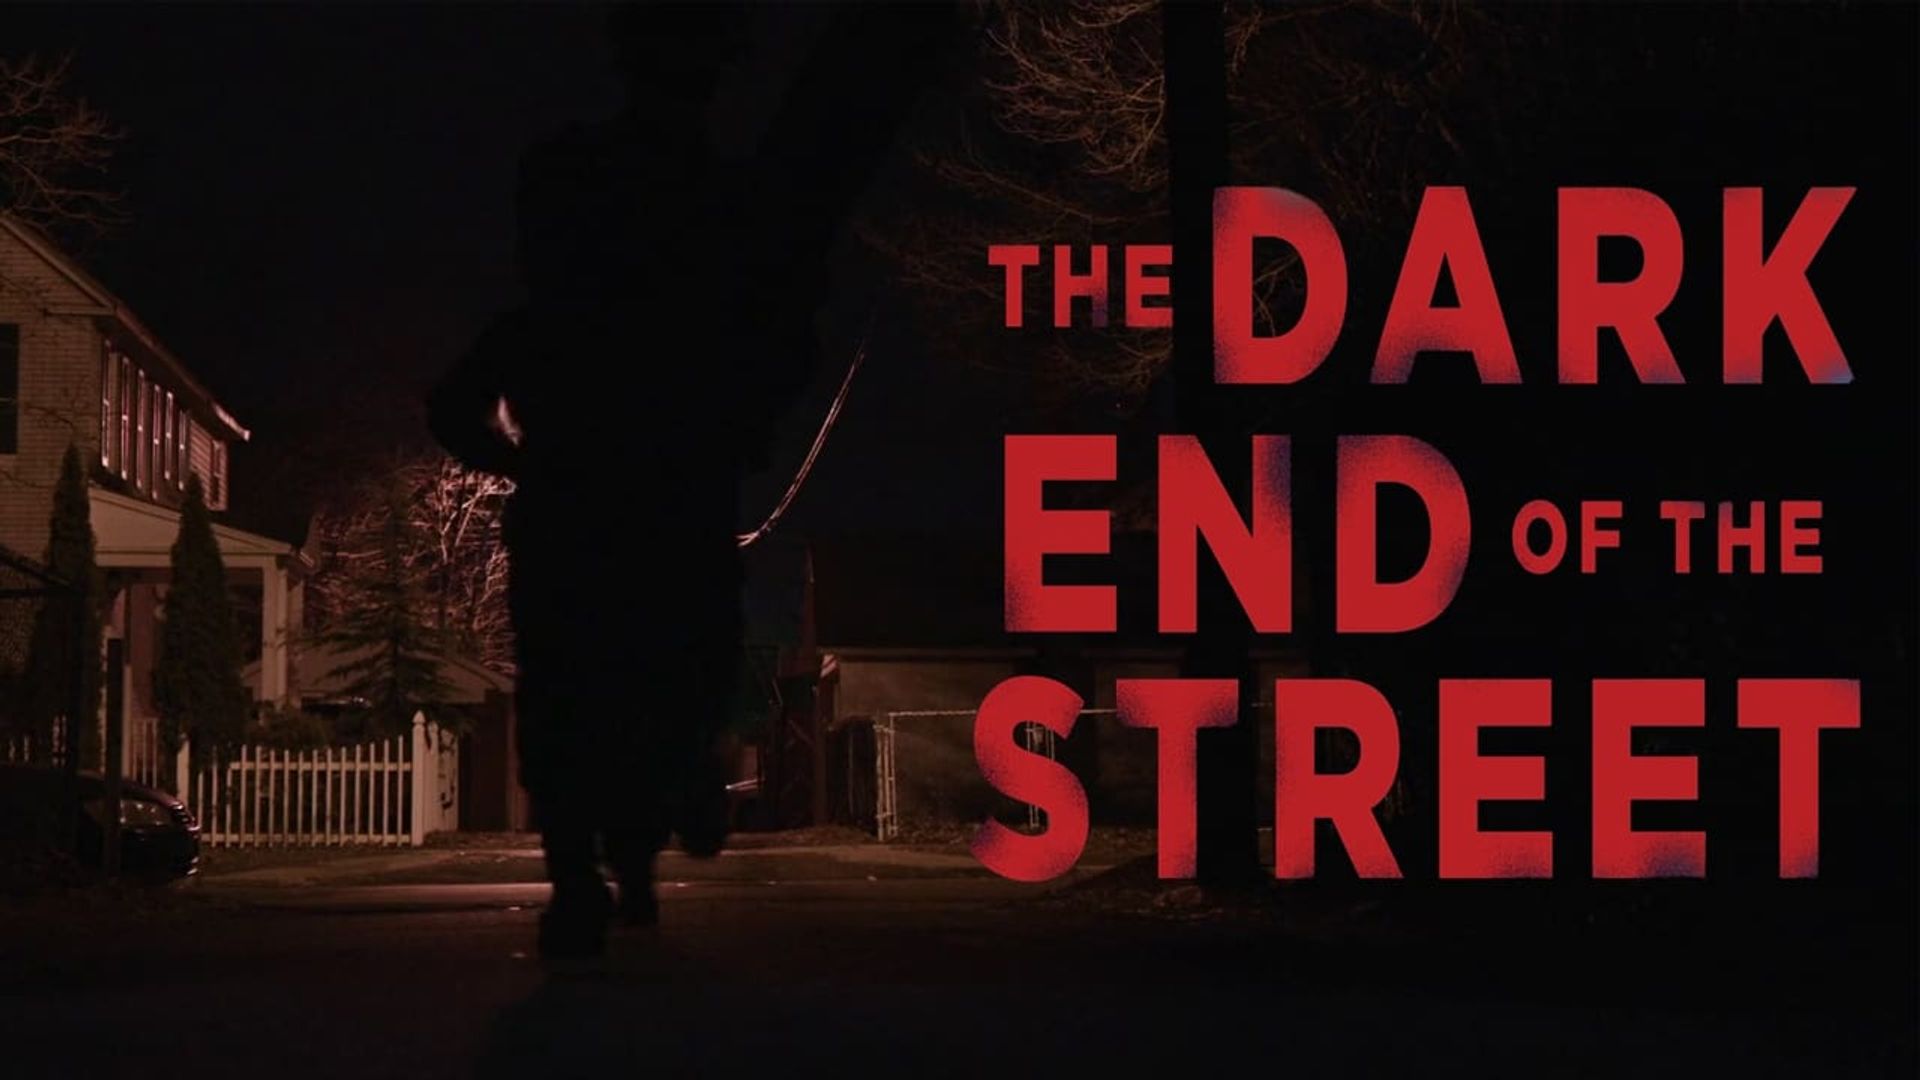 The Dark End of the Street background